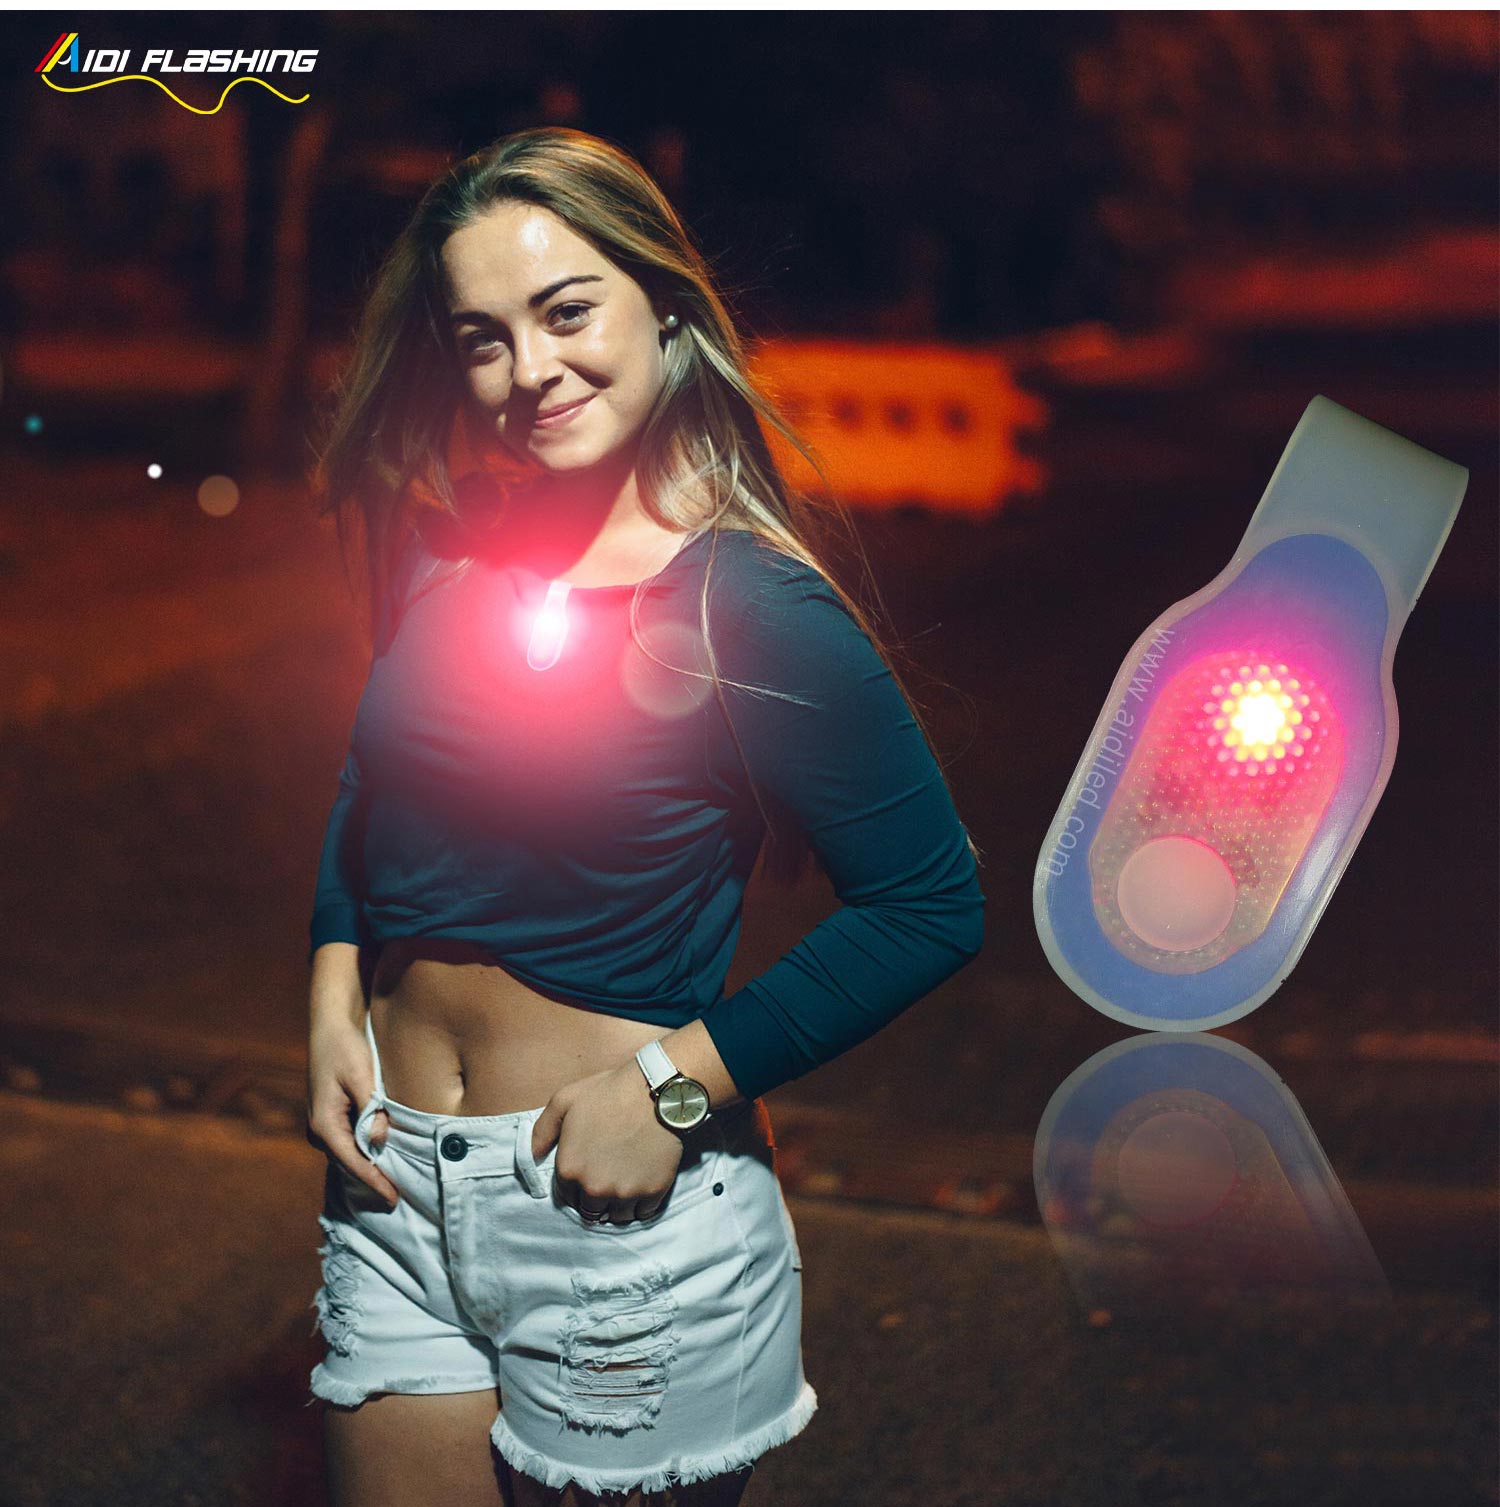 waterproof USB rechargeable LED magnet clip safety lights for runners AIDI-S5